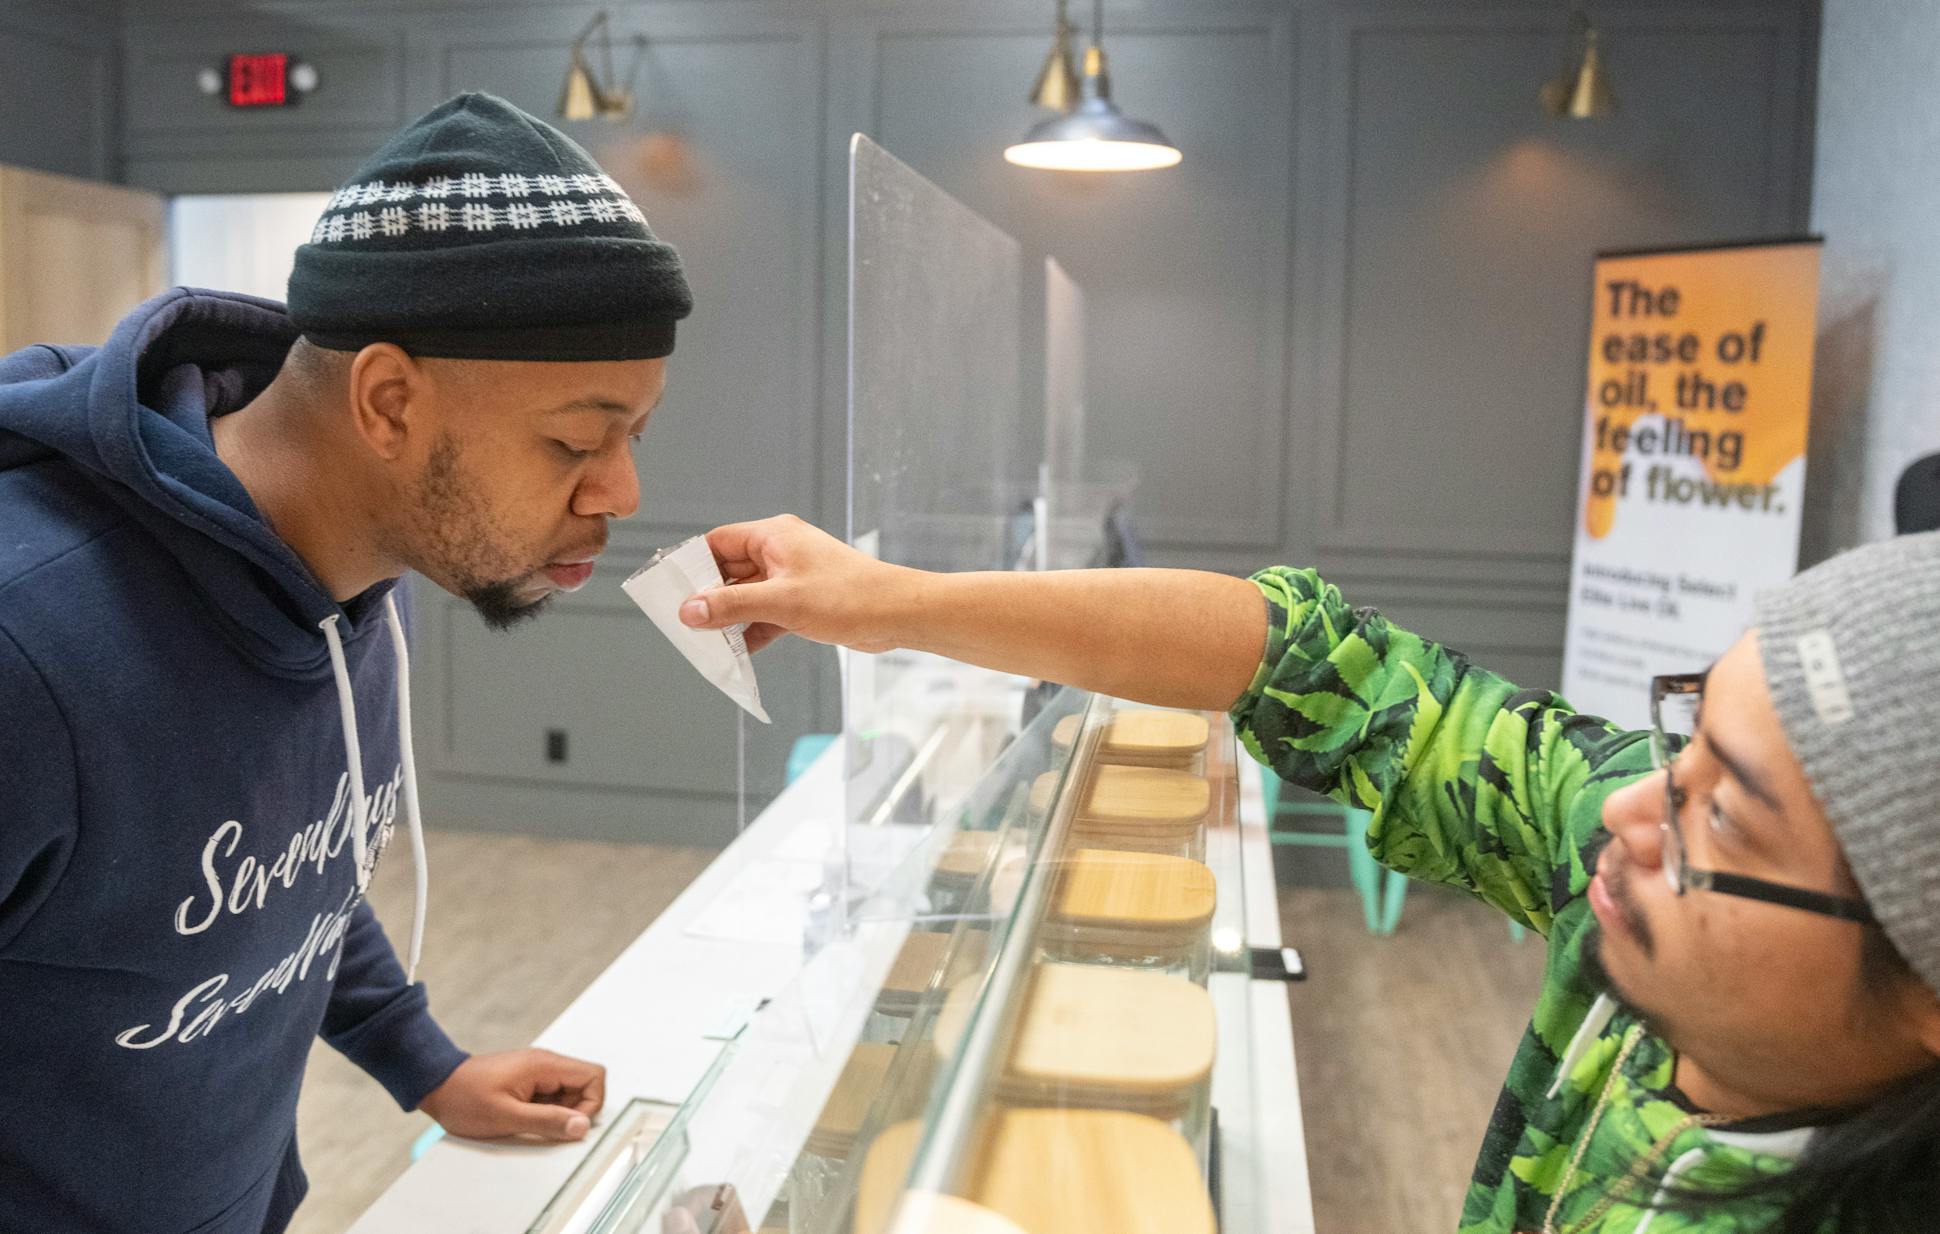 Shawn Triplett from Ann Arbor smells different strains of cannabis flower with help from Paul Manzo, a budtender at Herbana in Ann Arbor.